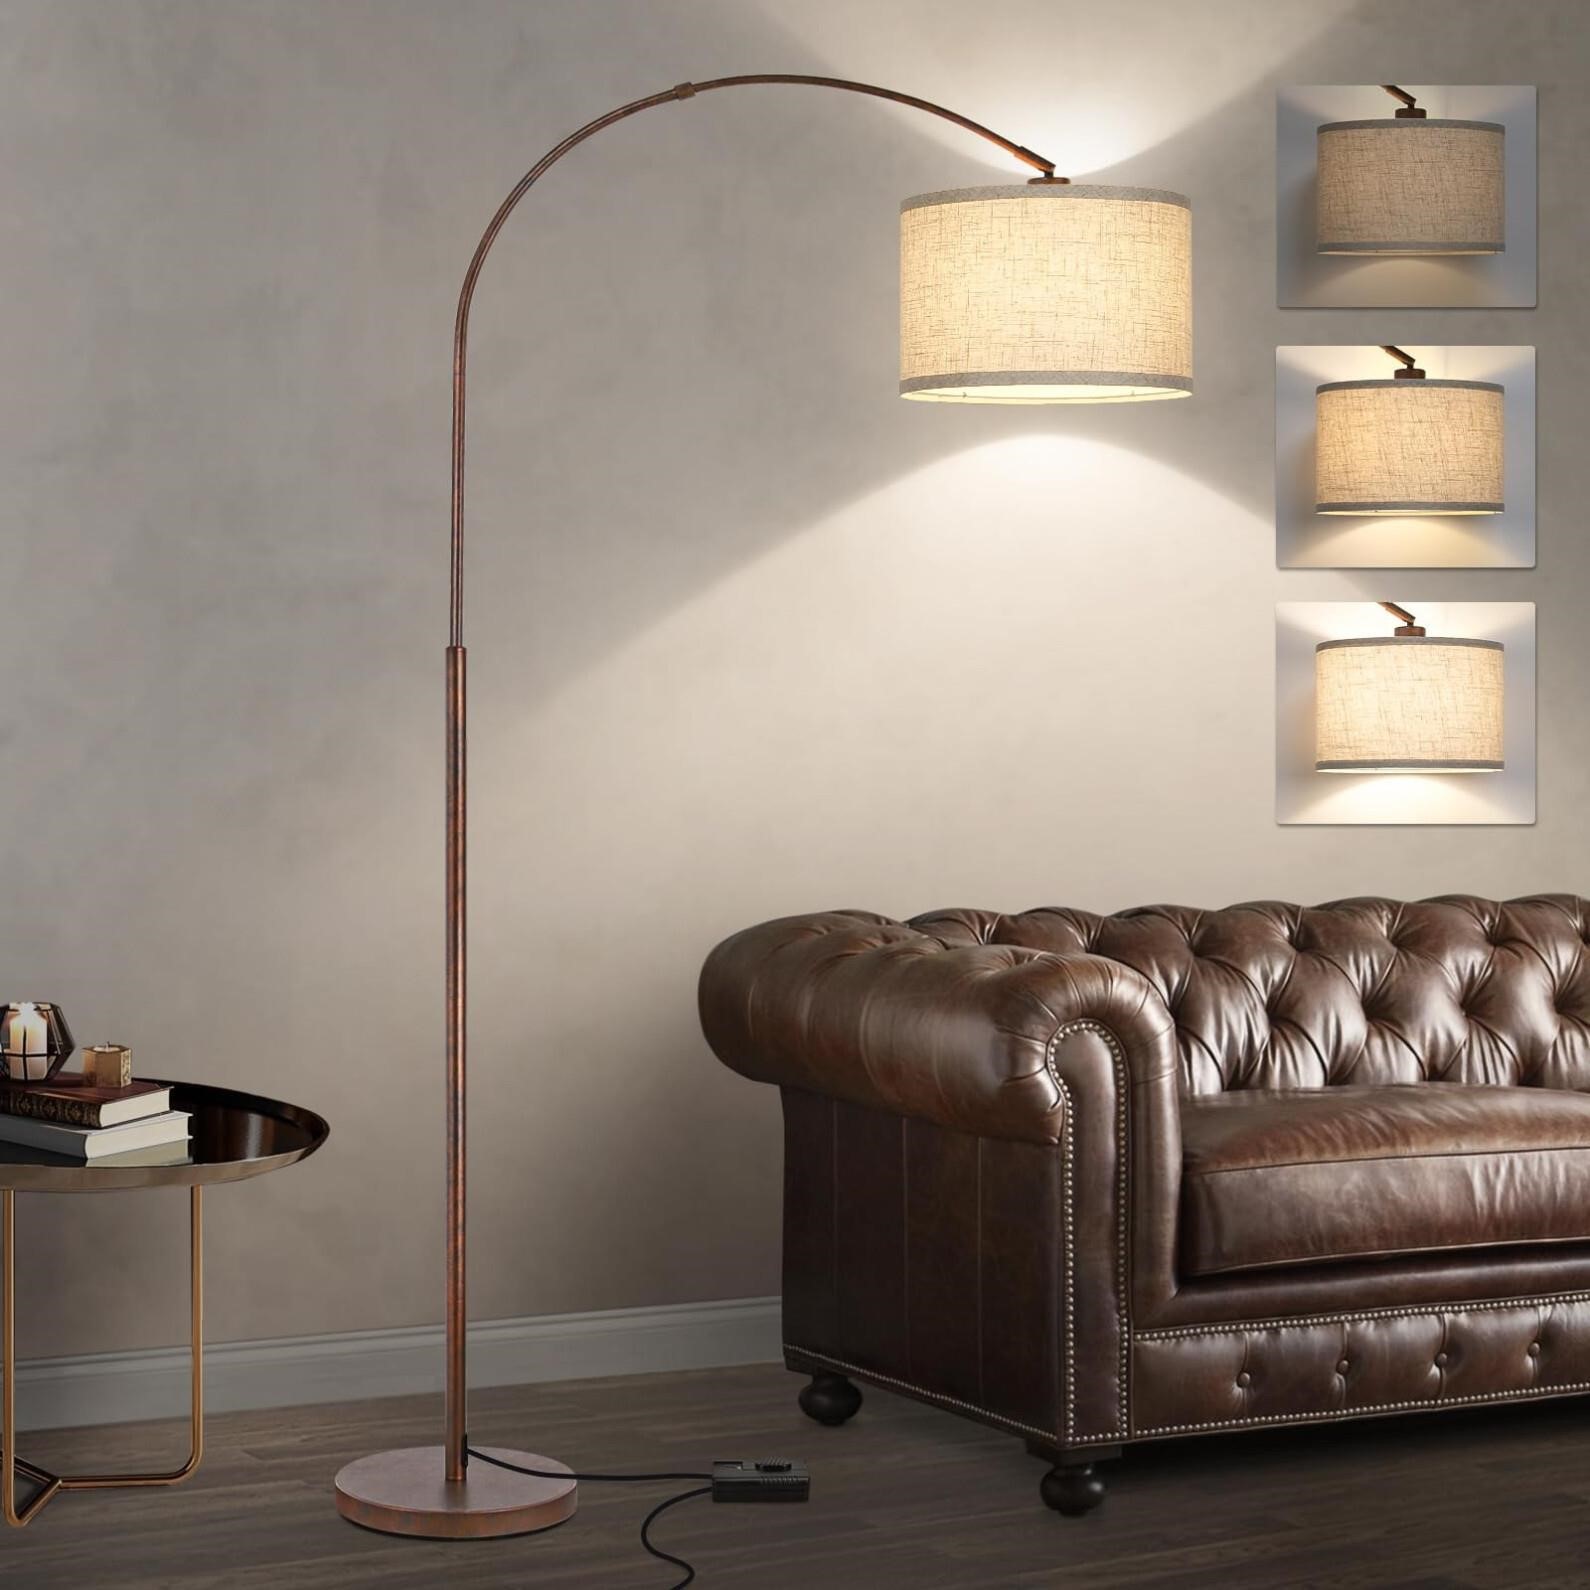 Dimmable Arc Floor Lamps for Living Room, Mid Cent